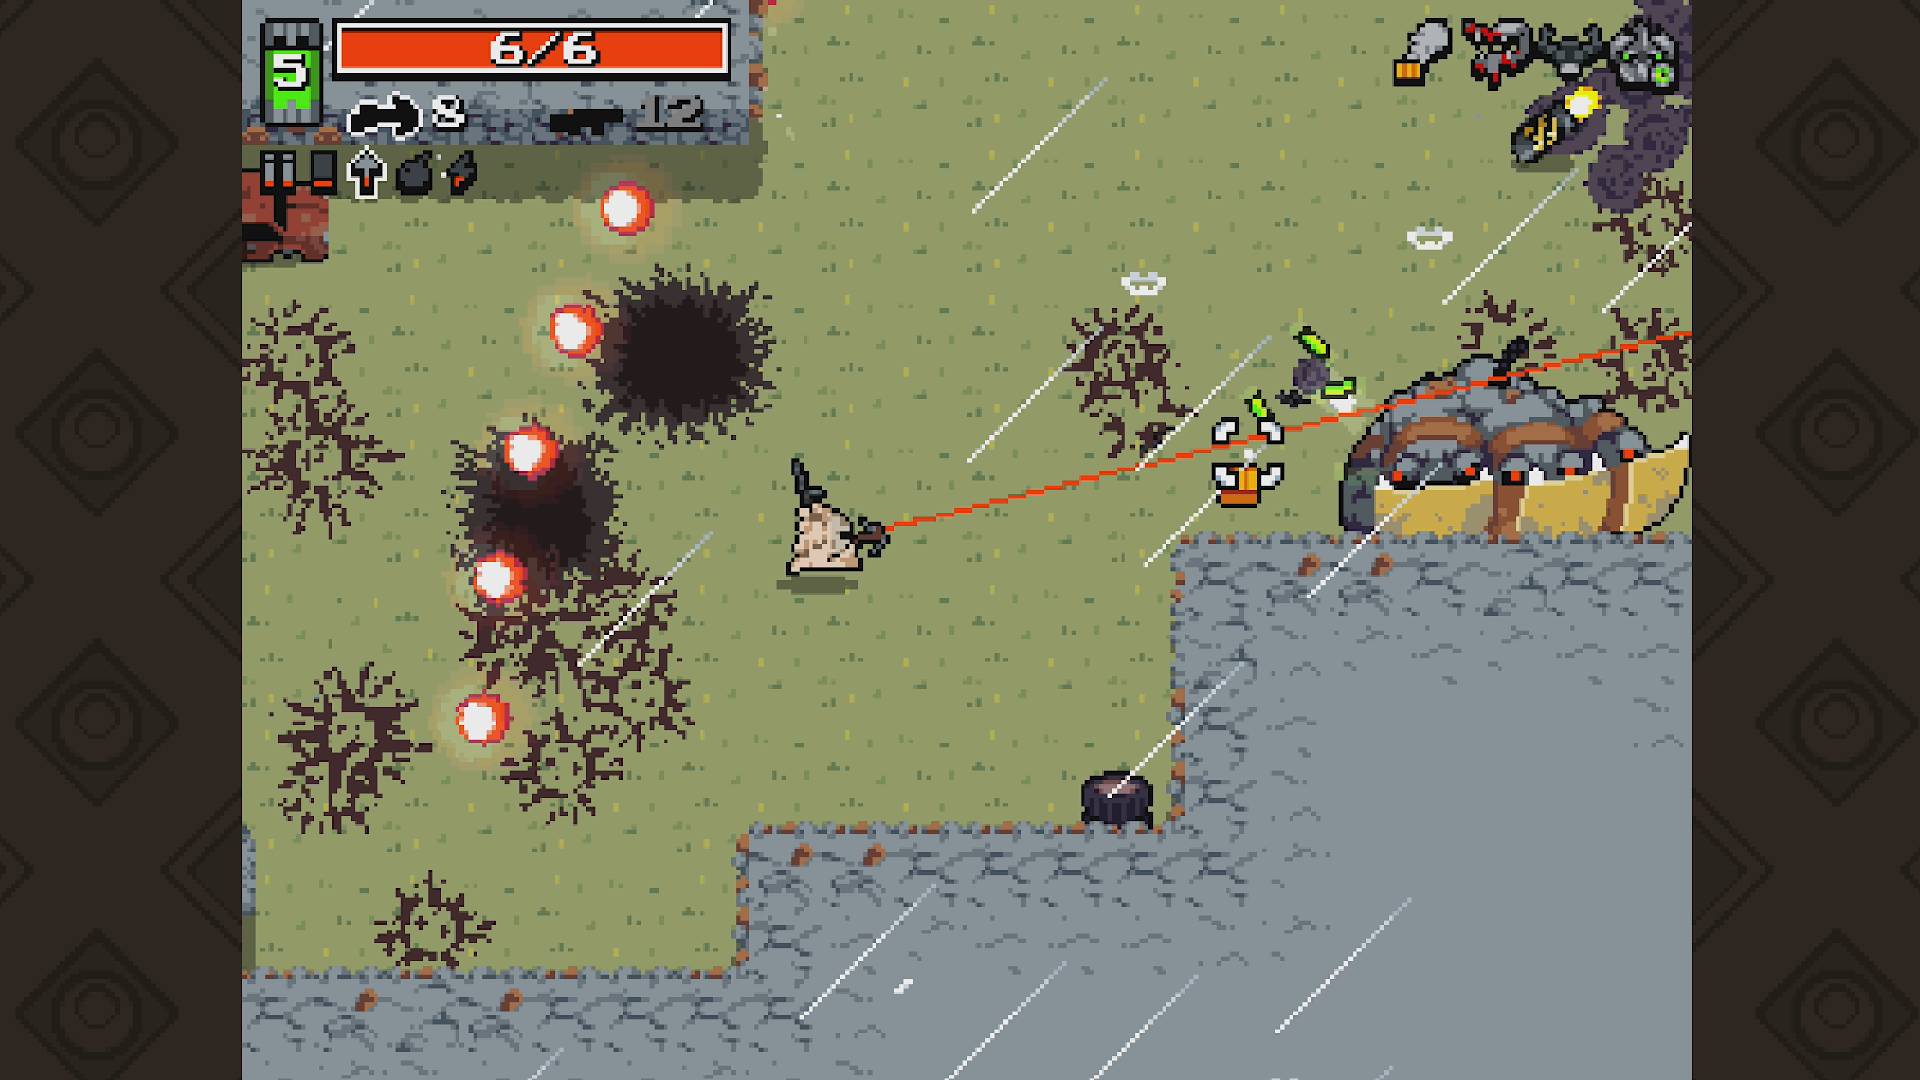 best post-apocalyptic games. A pixelated scene shows a small character battling waves of mutants